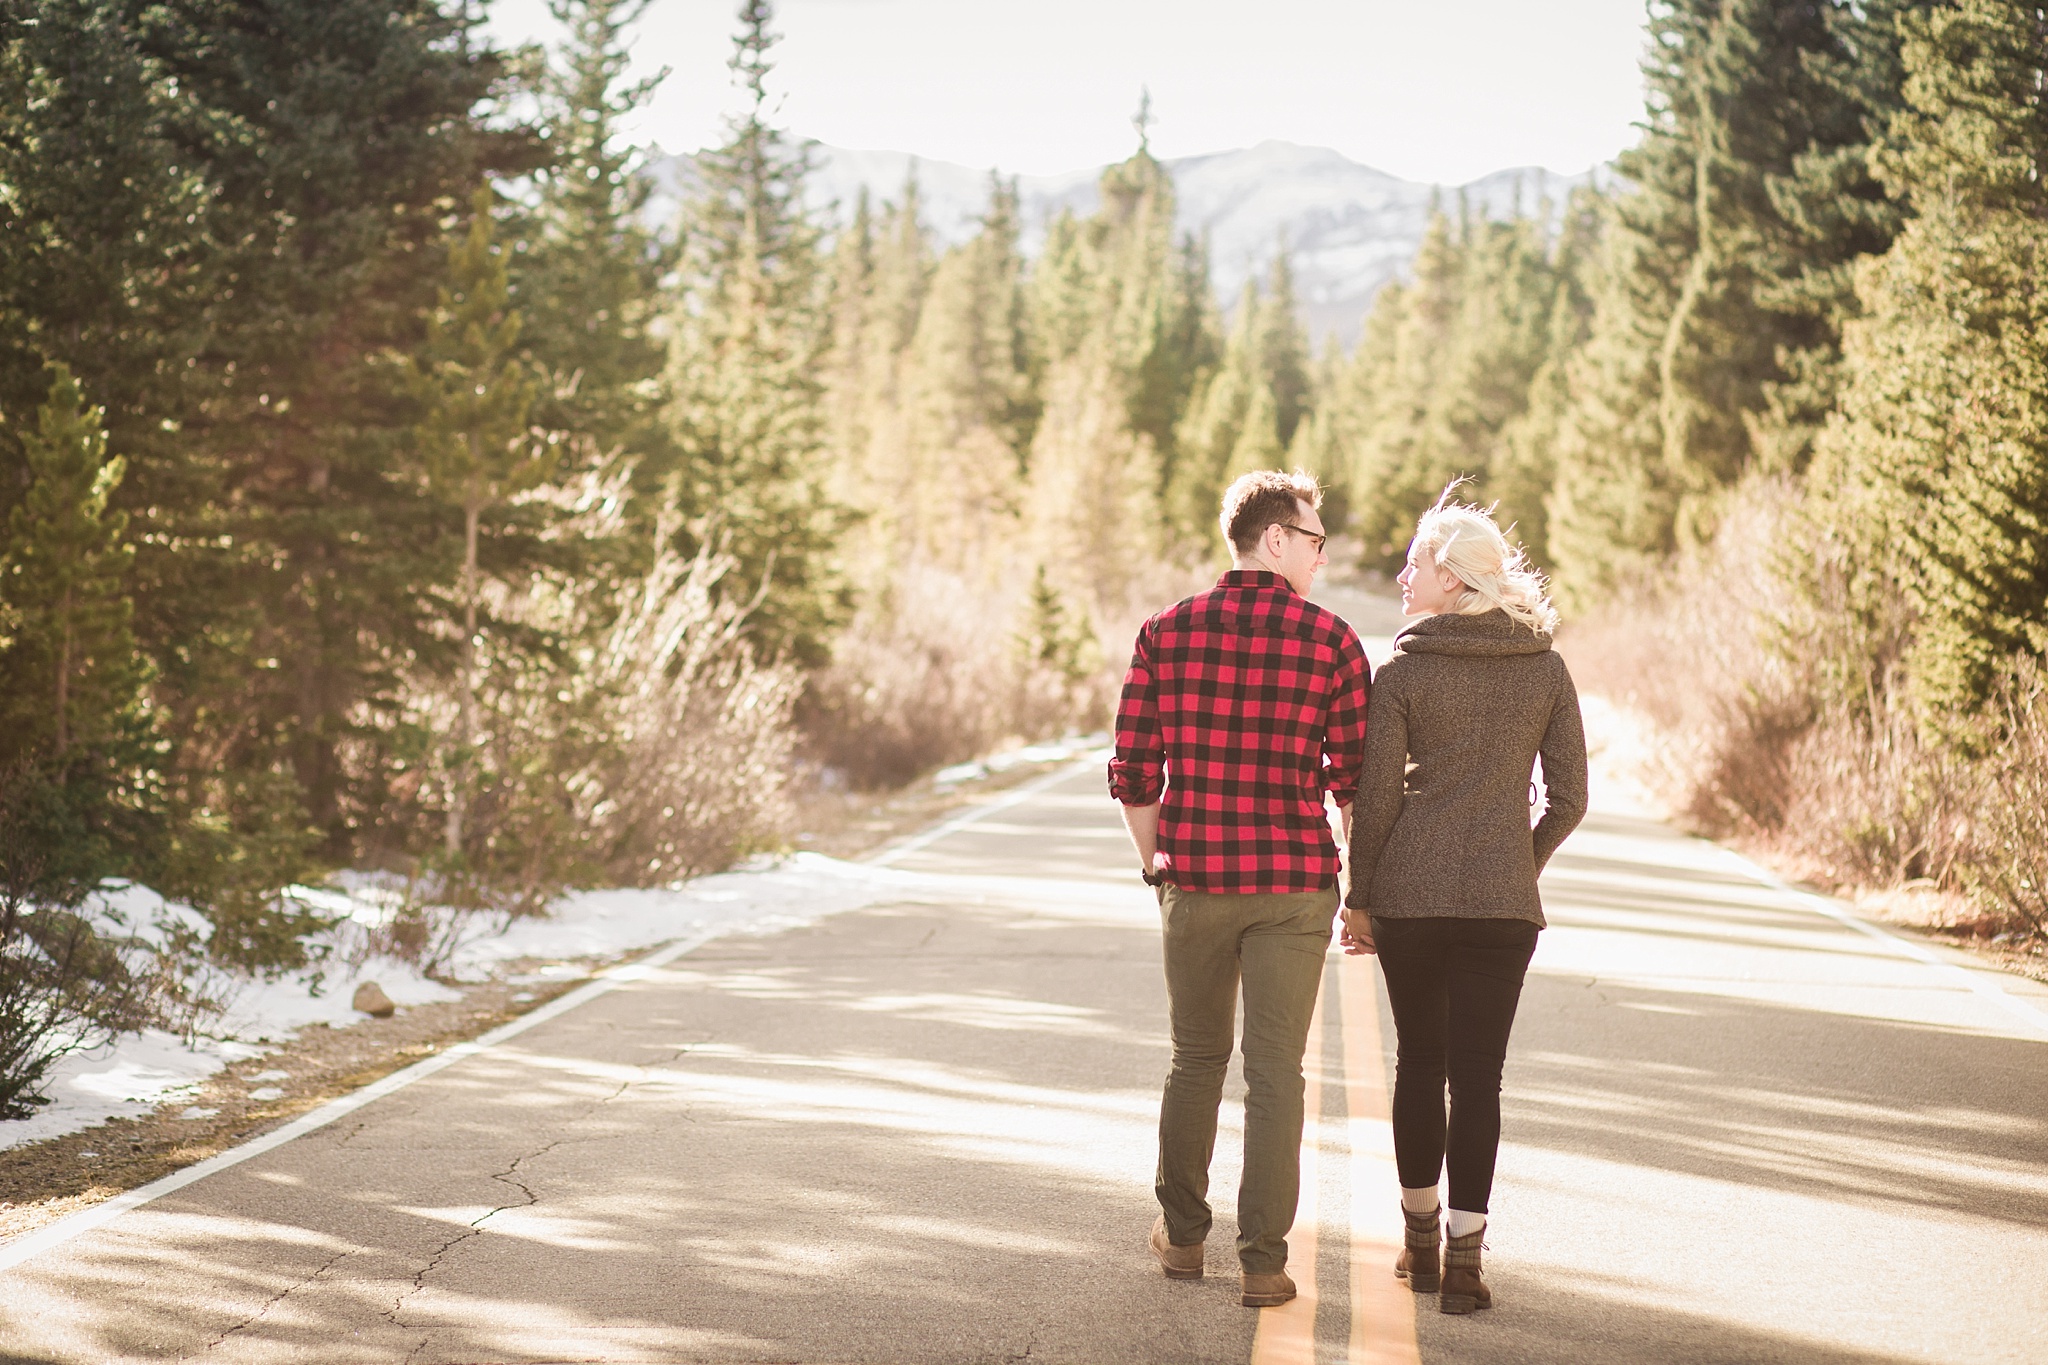 Couple walking together down a mountain road at sunset during their engagement session. Amy & Jonathan’s Brainard Lake Winter Engagement Session by Colorado Engagement Photographer, Jennifer Garza. Colorado Engagement Photographer, Colorado Engagement Photography, Brainard Lake Engagement Session, Brainard Lake Engagement Photos, Mountain Engagement Session, Colorado Winter Engagement Photos, Winter Engagement Photography, Mountain Engagement Photographer, Colorado Wedding, Colorado Bride